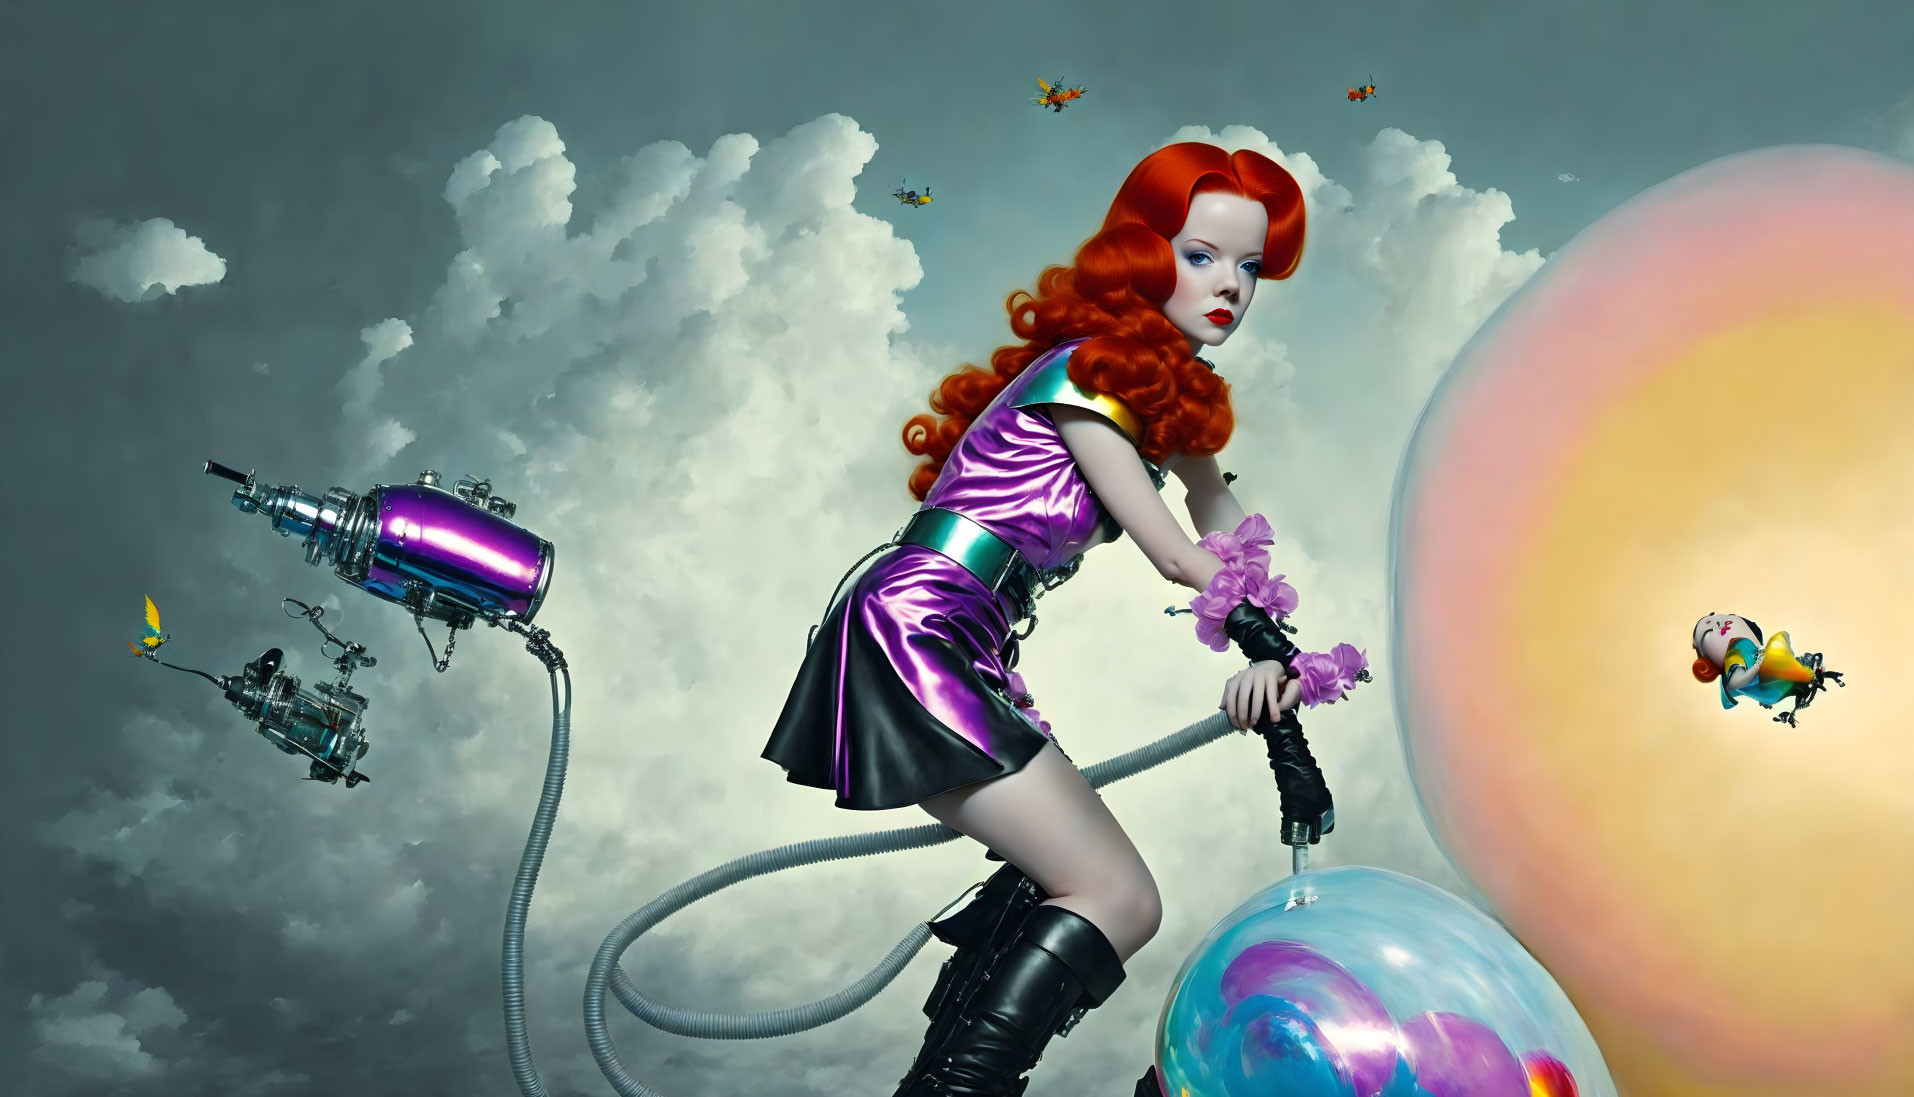 Red-haired female in metallic dress on globe with whimsical spaceships under cloudy sky